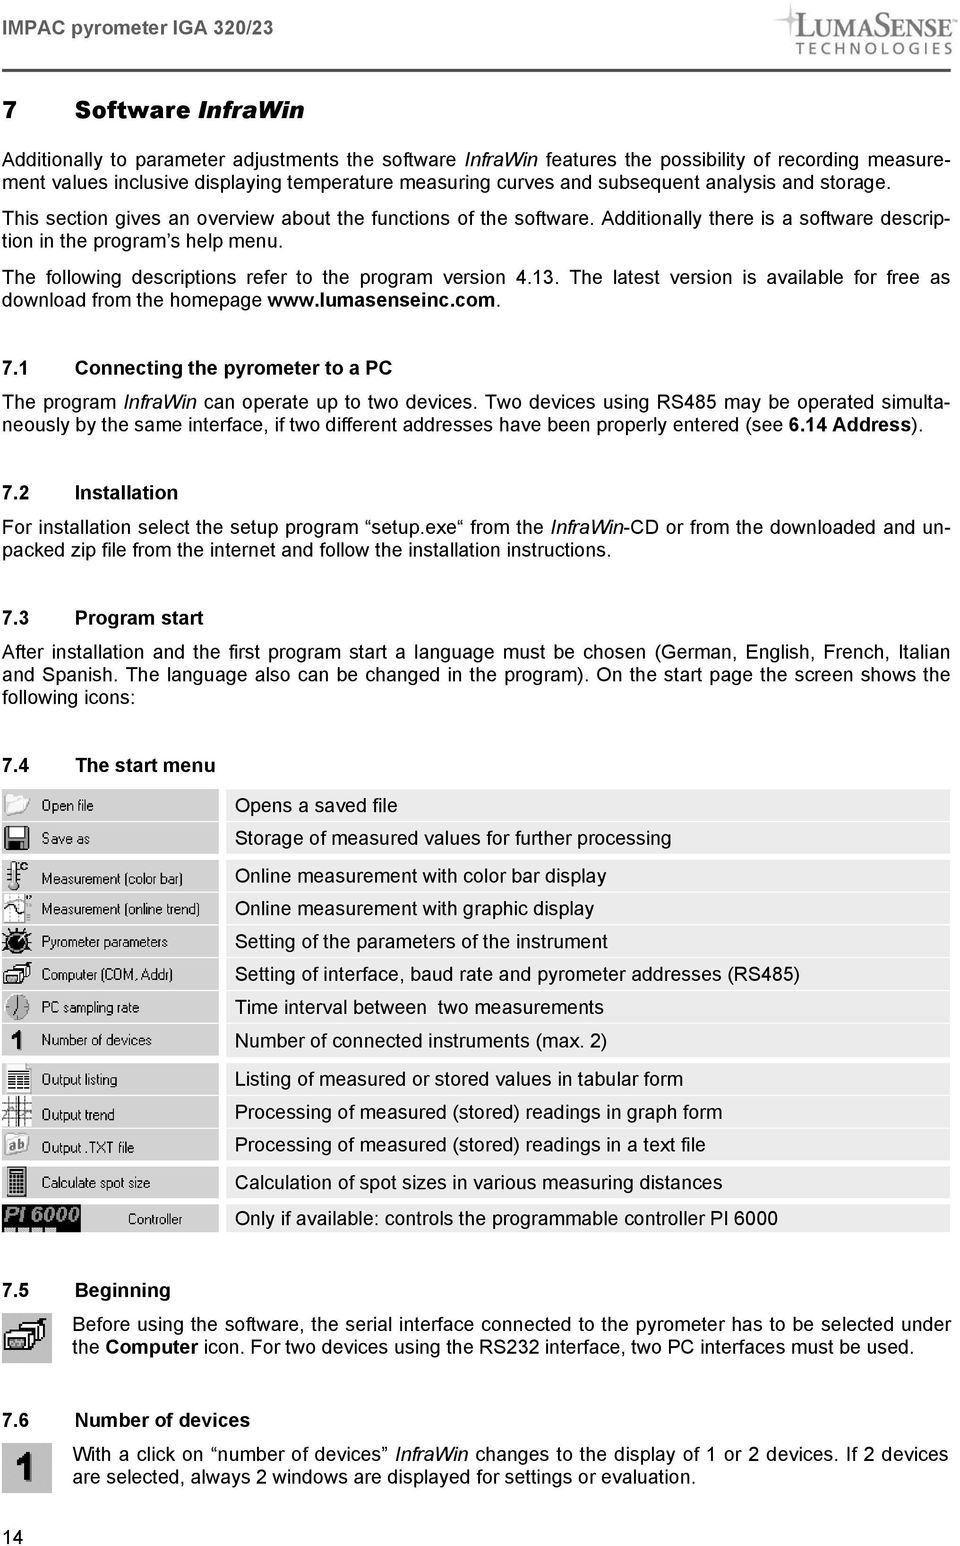 The following descriptions refer to the program version 4.13. The latest version is available for free as download from the homepage www.lumasenseinc.com. 7.